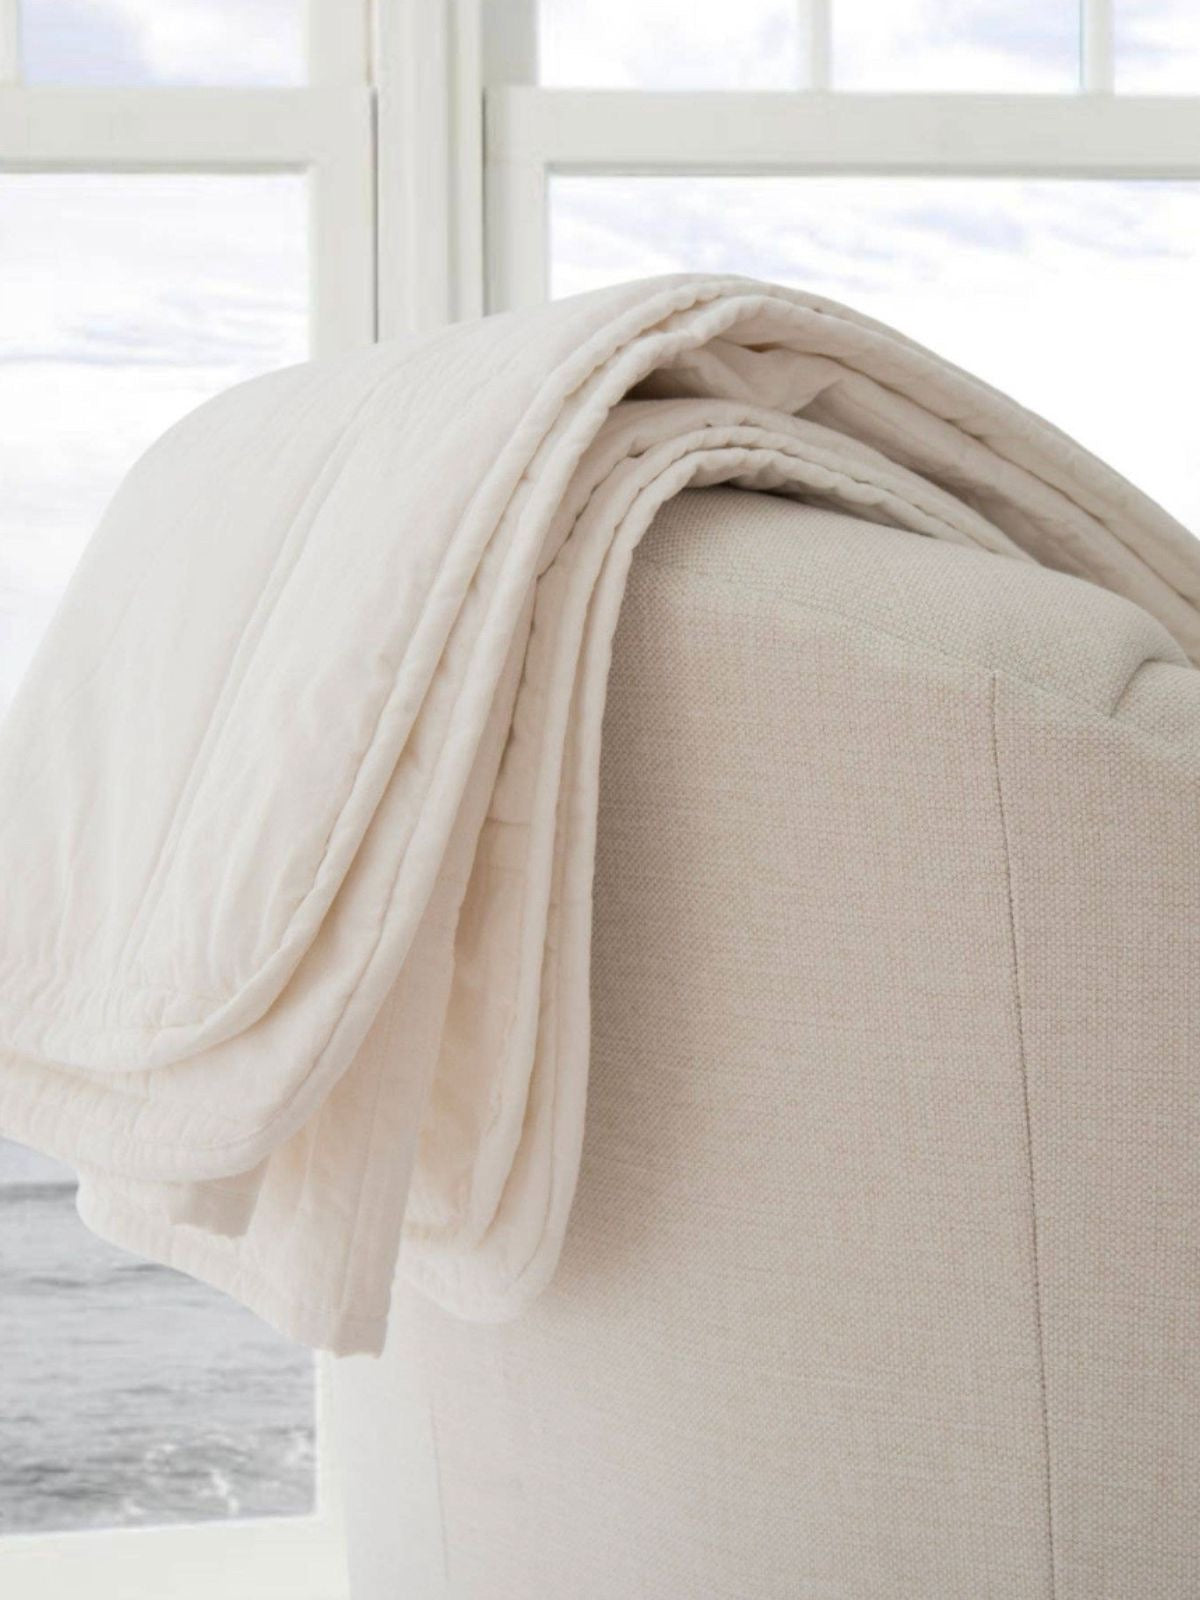 100% Matelasse Cotton Beach House Decorative Throw Blanket in Luxurious White Color, 50W x 60L.